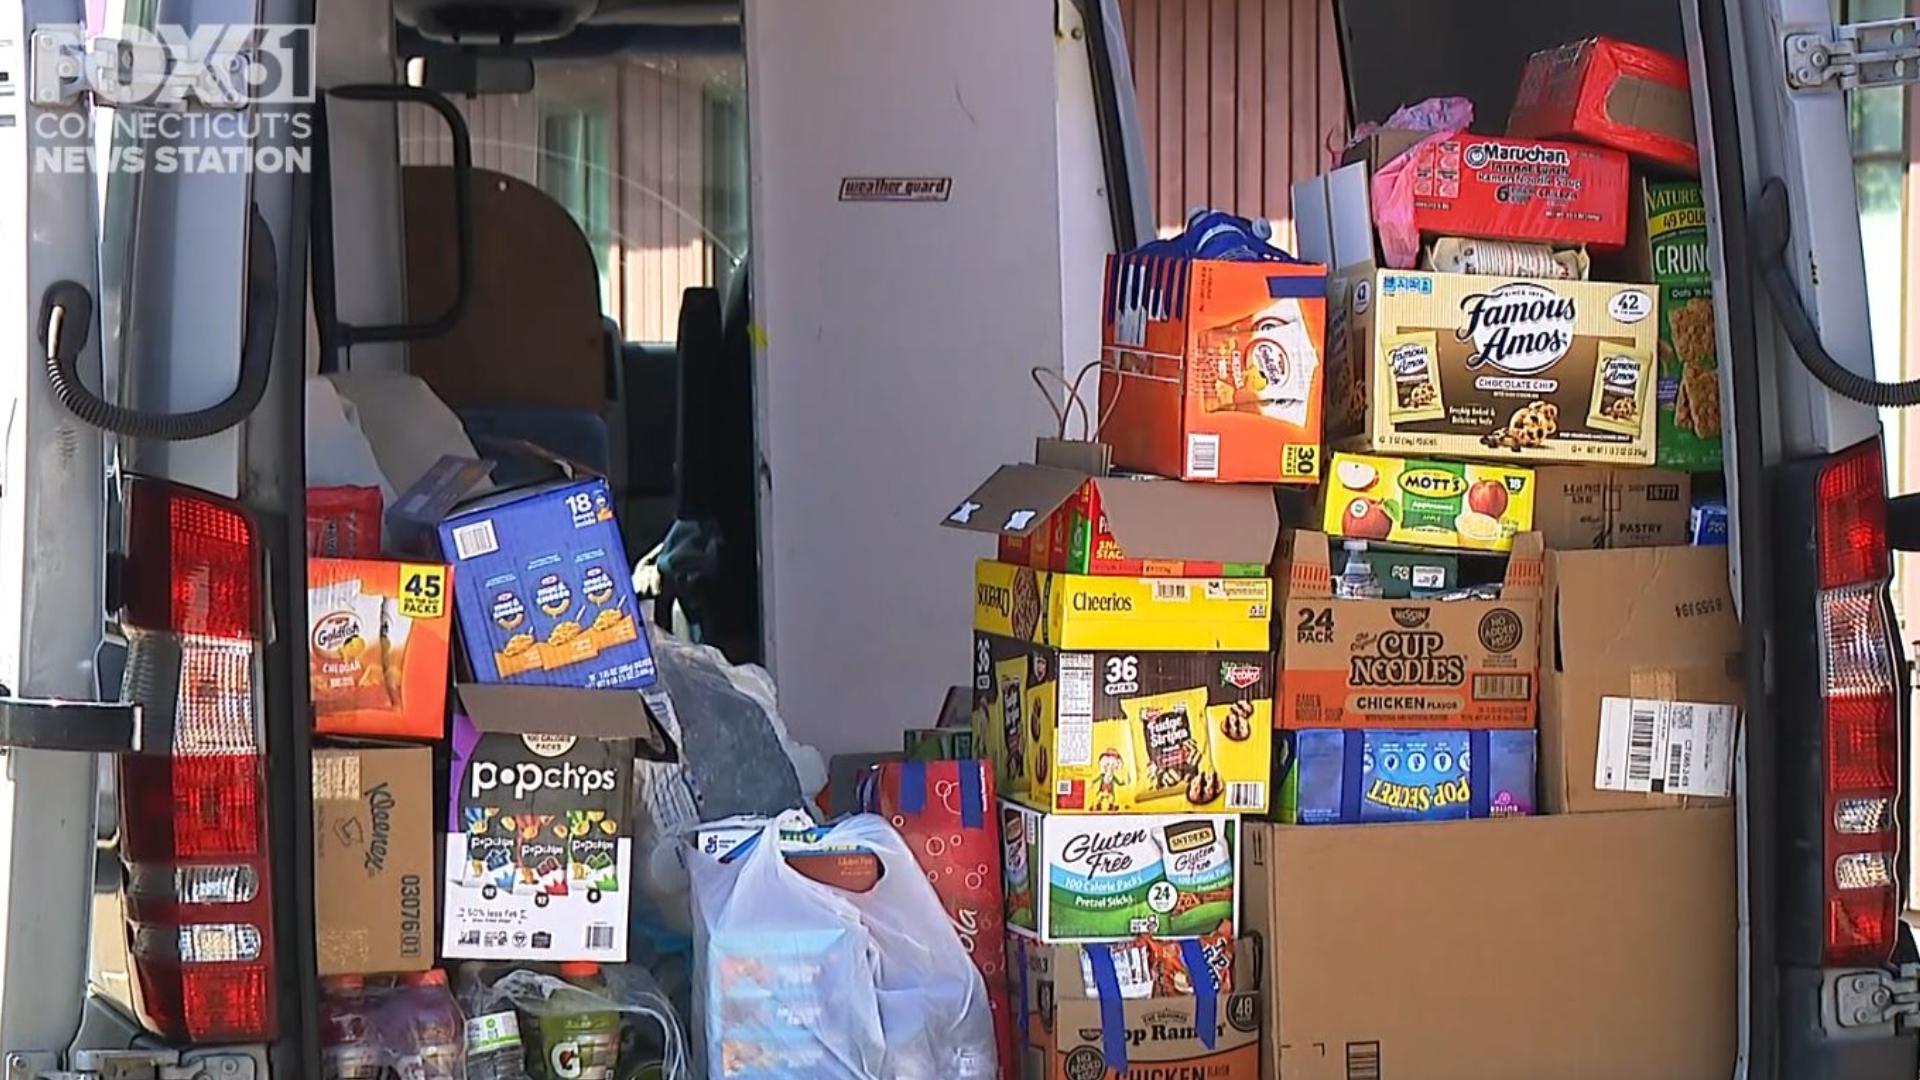 Quinnipiac University students have donated more than four tons of food to feed people in need around the state.